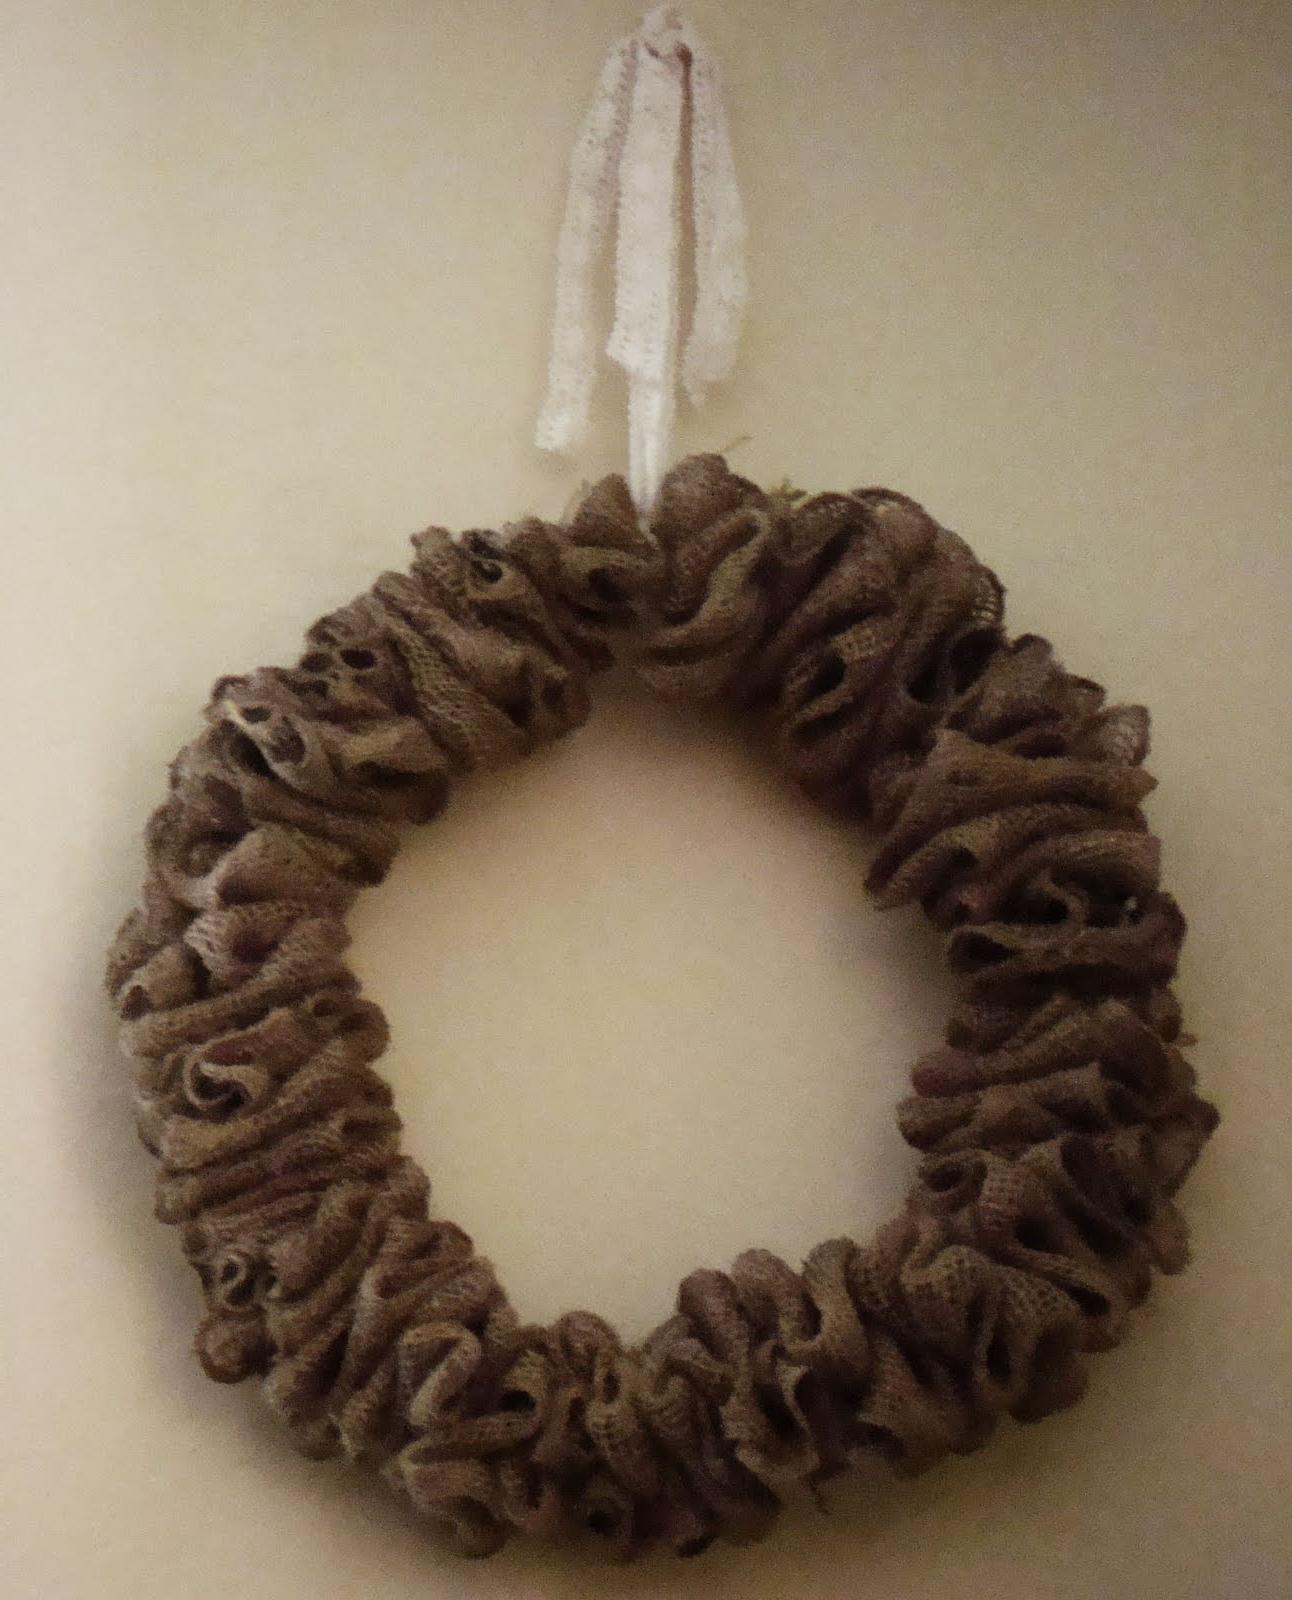 Here is the hanging burlap